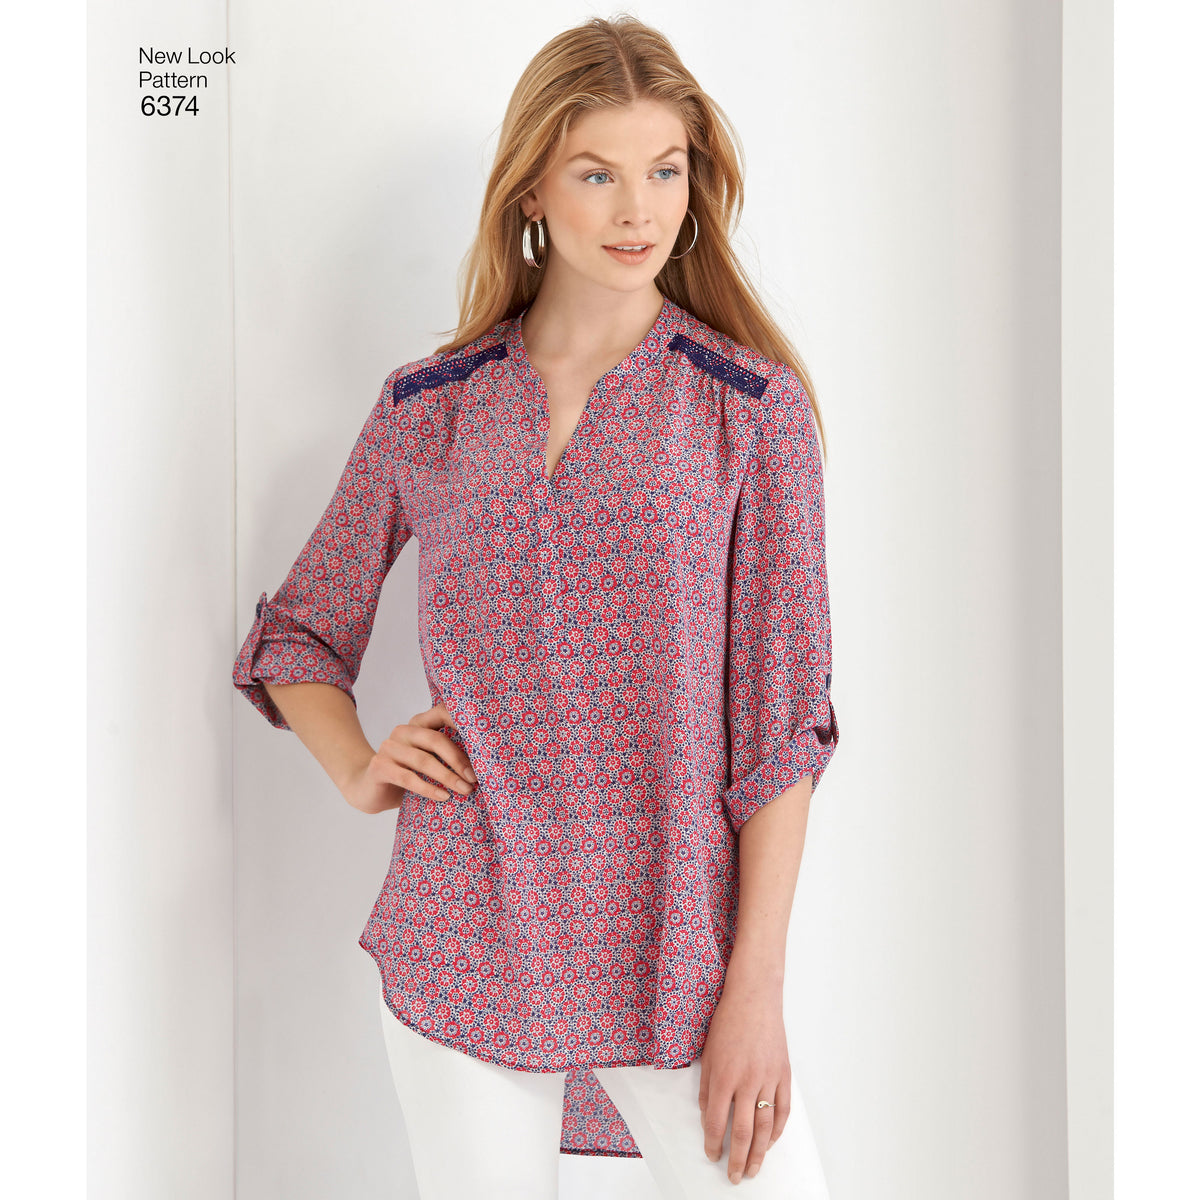 6374 Misses' Shirts with Sleeve and Length Options